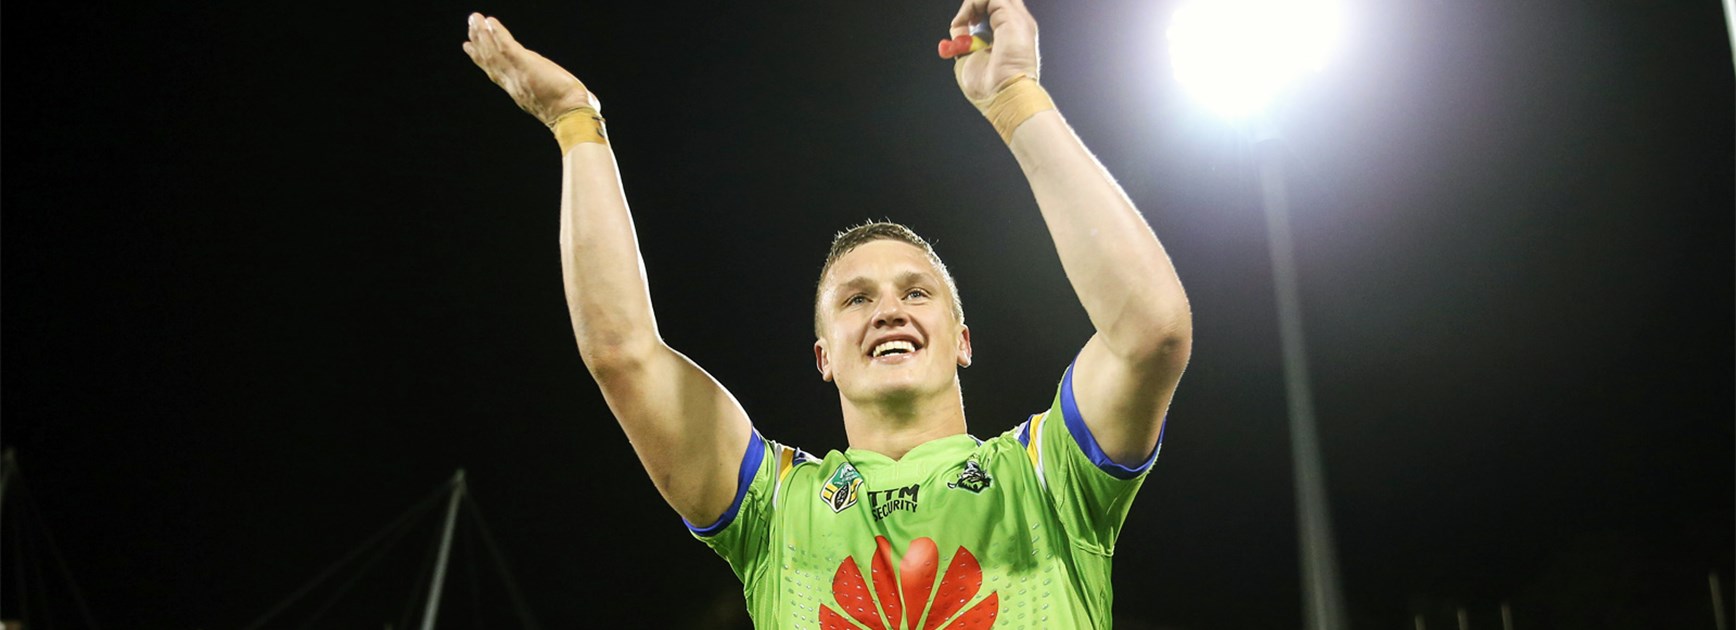 Raiders fullback Jack Wighton proved to be a defensive weapon in 2016.